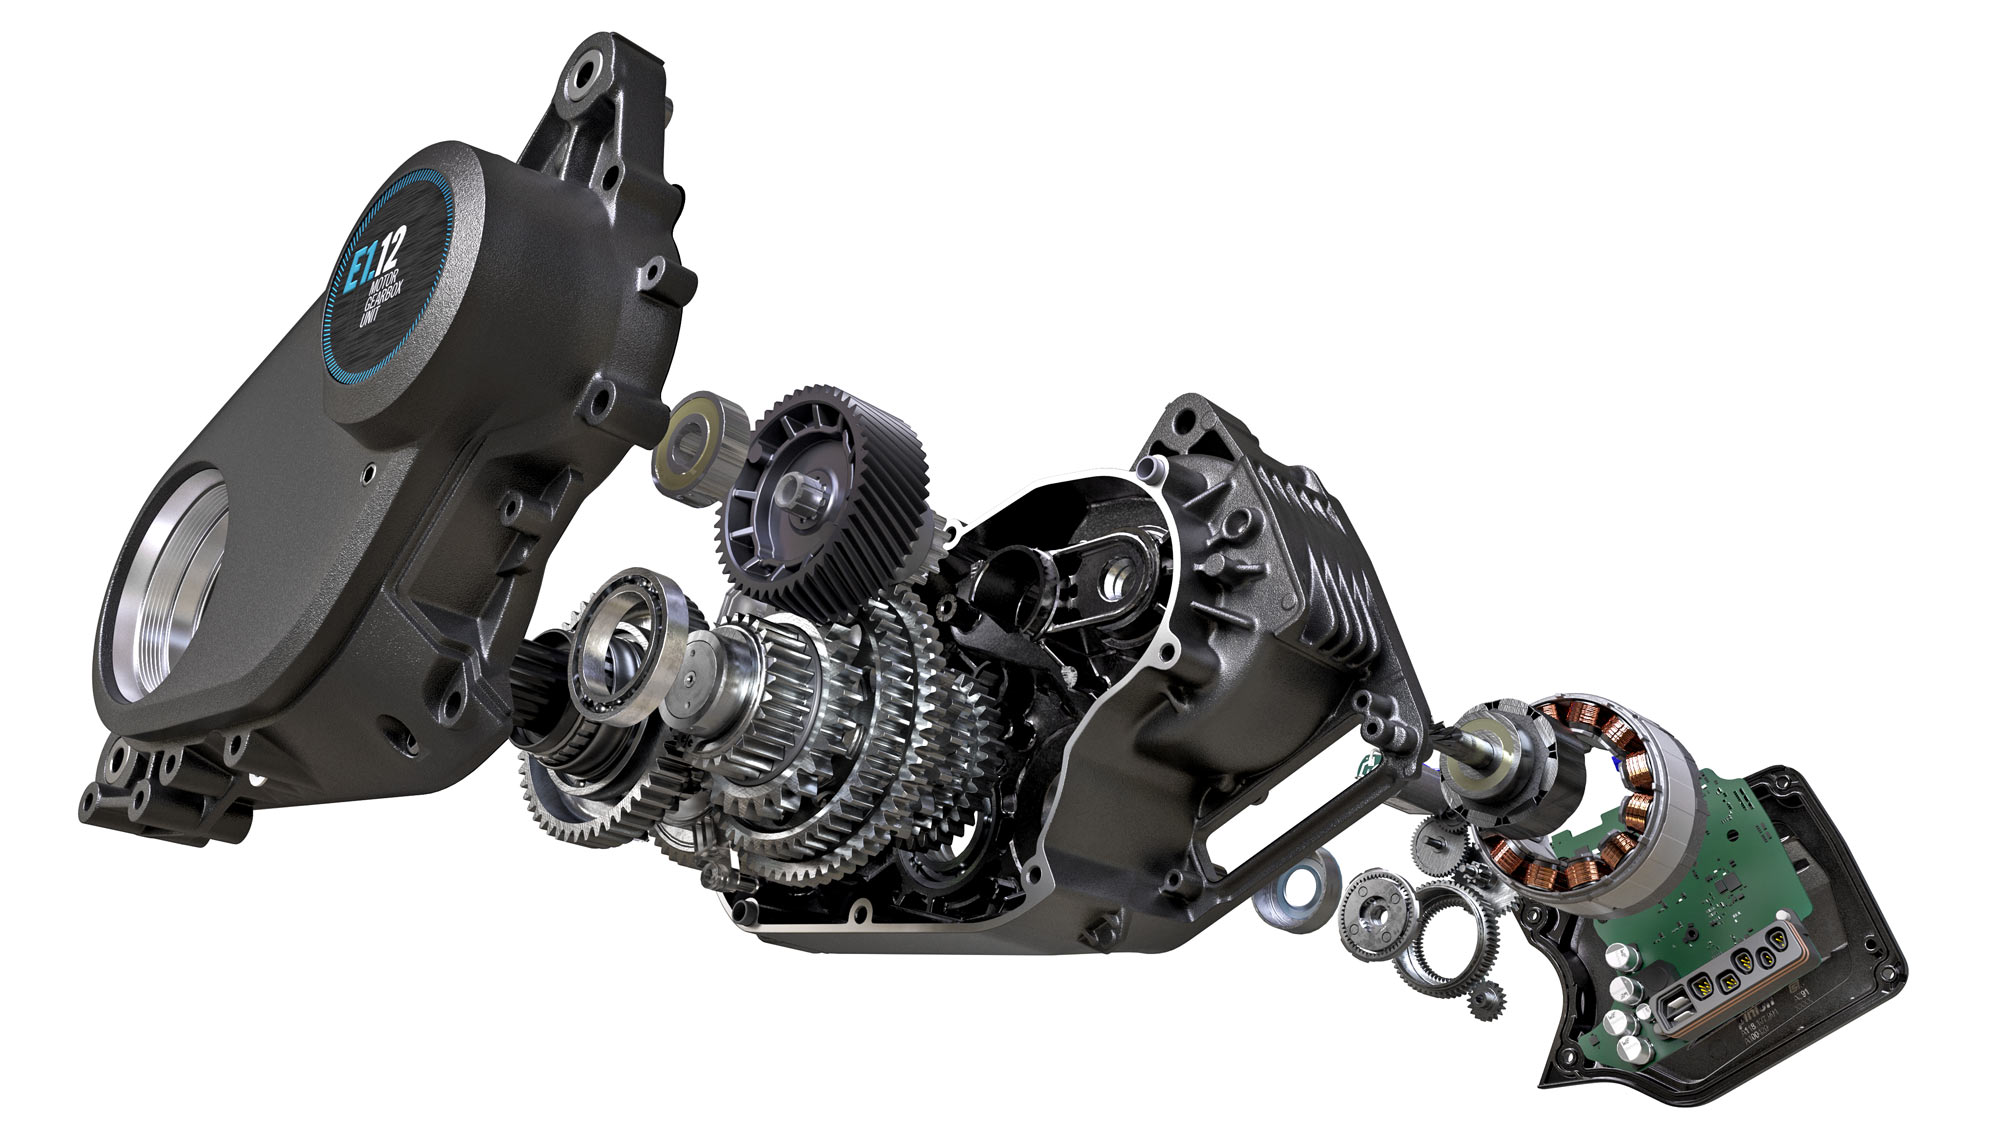 Pinion ON.E combined ebike motor gearbox unit MGU complete transmission powertrain, exploded view